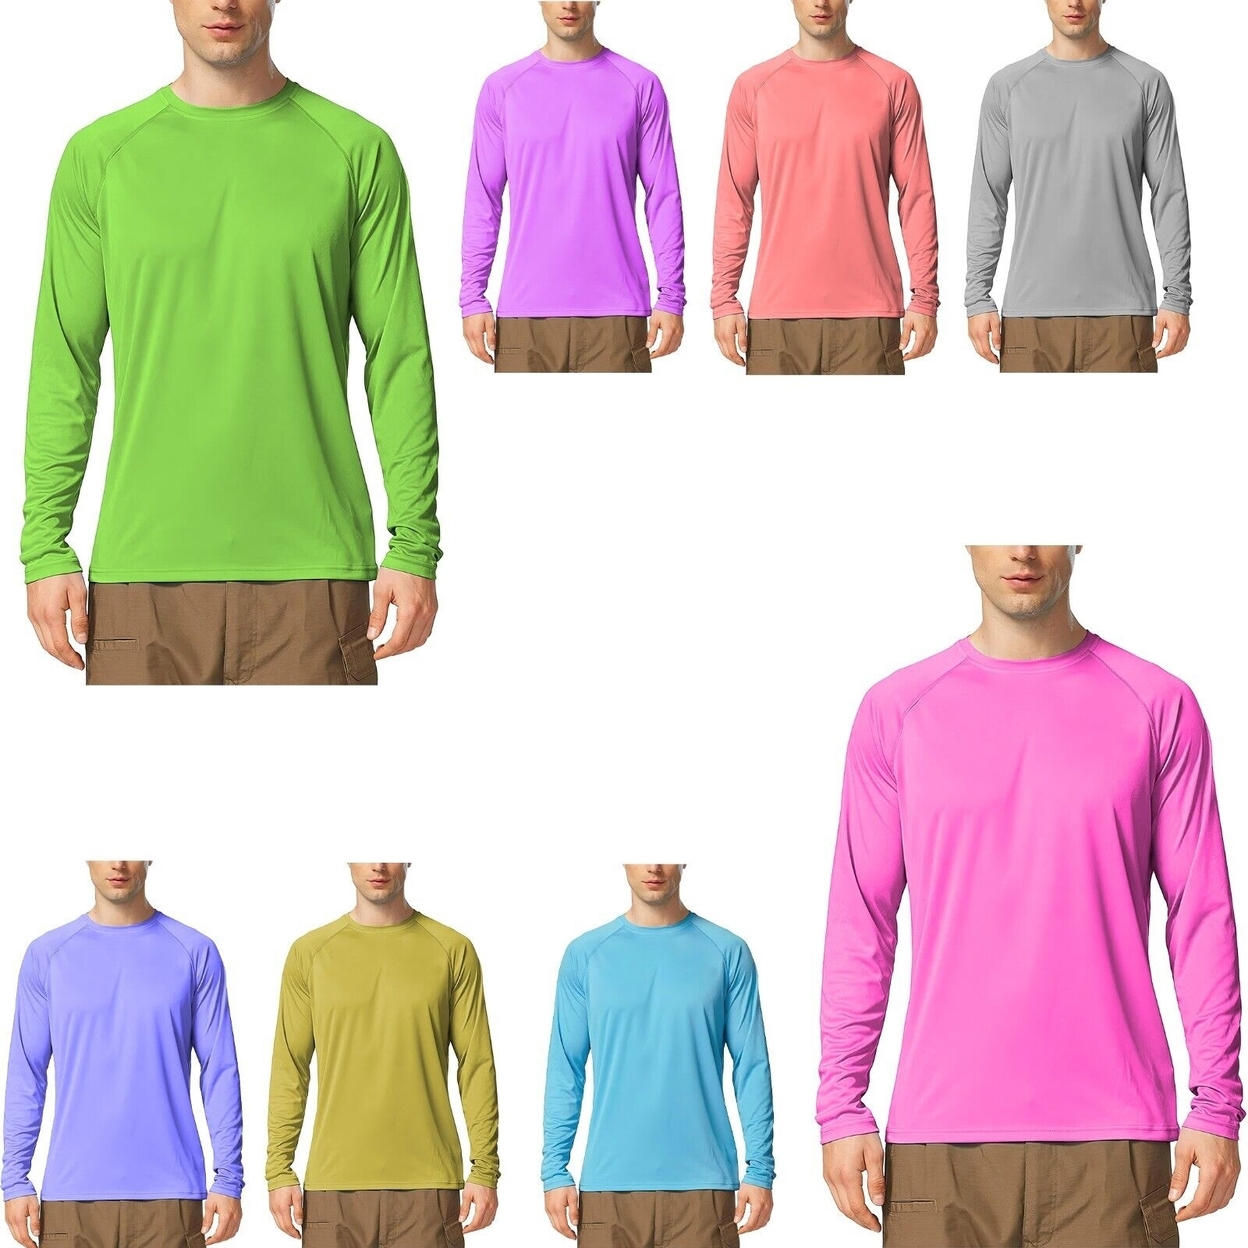 Multi-Pack: Men's Dri-Fit Moisture Wicking Athletic Cool Performance Slim Fit Long Sleeve T-Shirts - 3-pack, Small